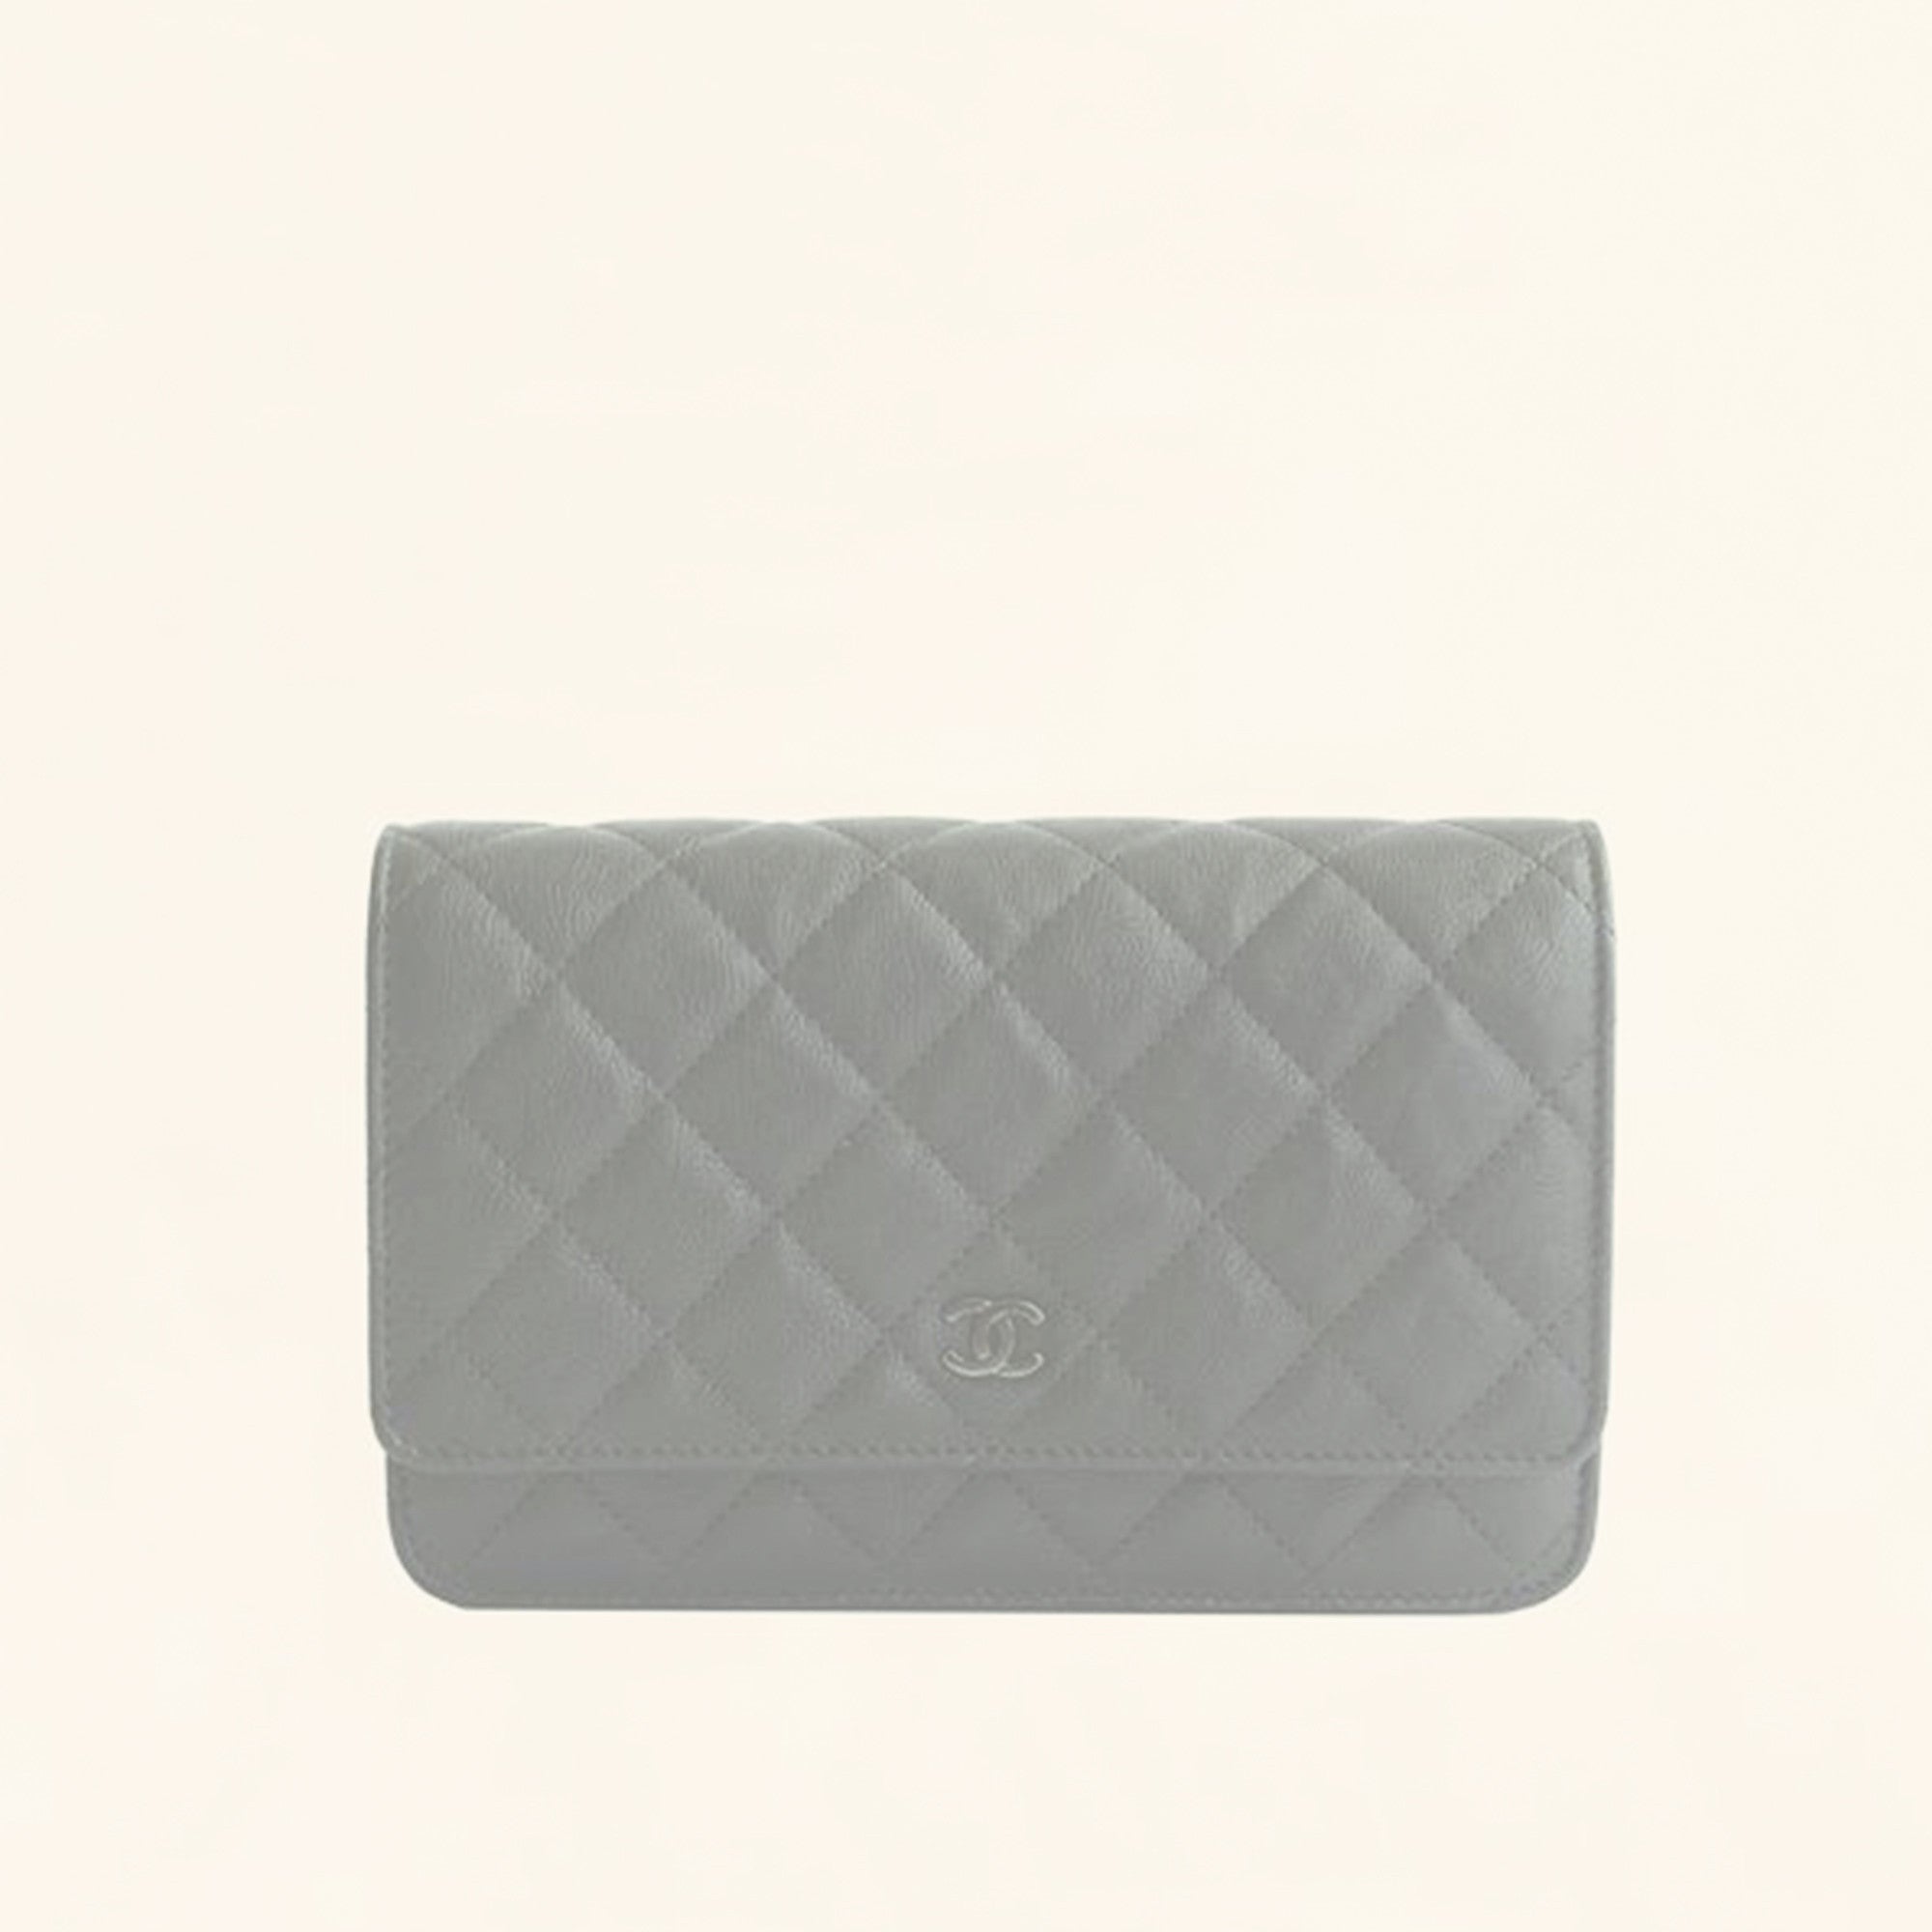 Chanel Wallet on Chain: The WOC